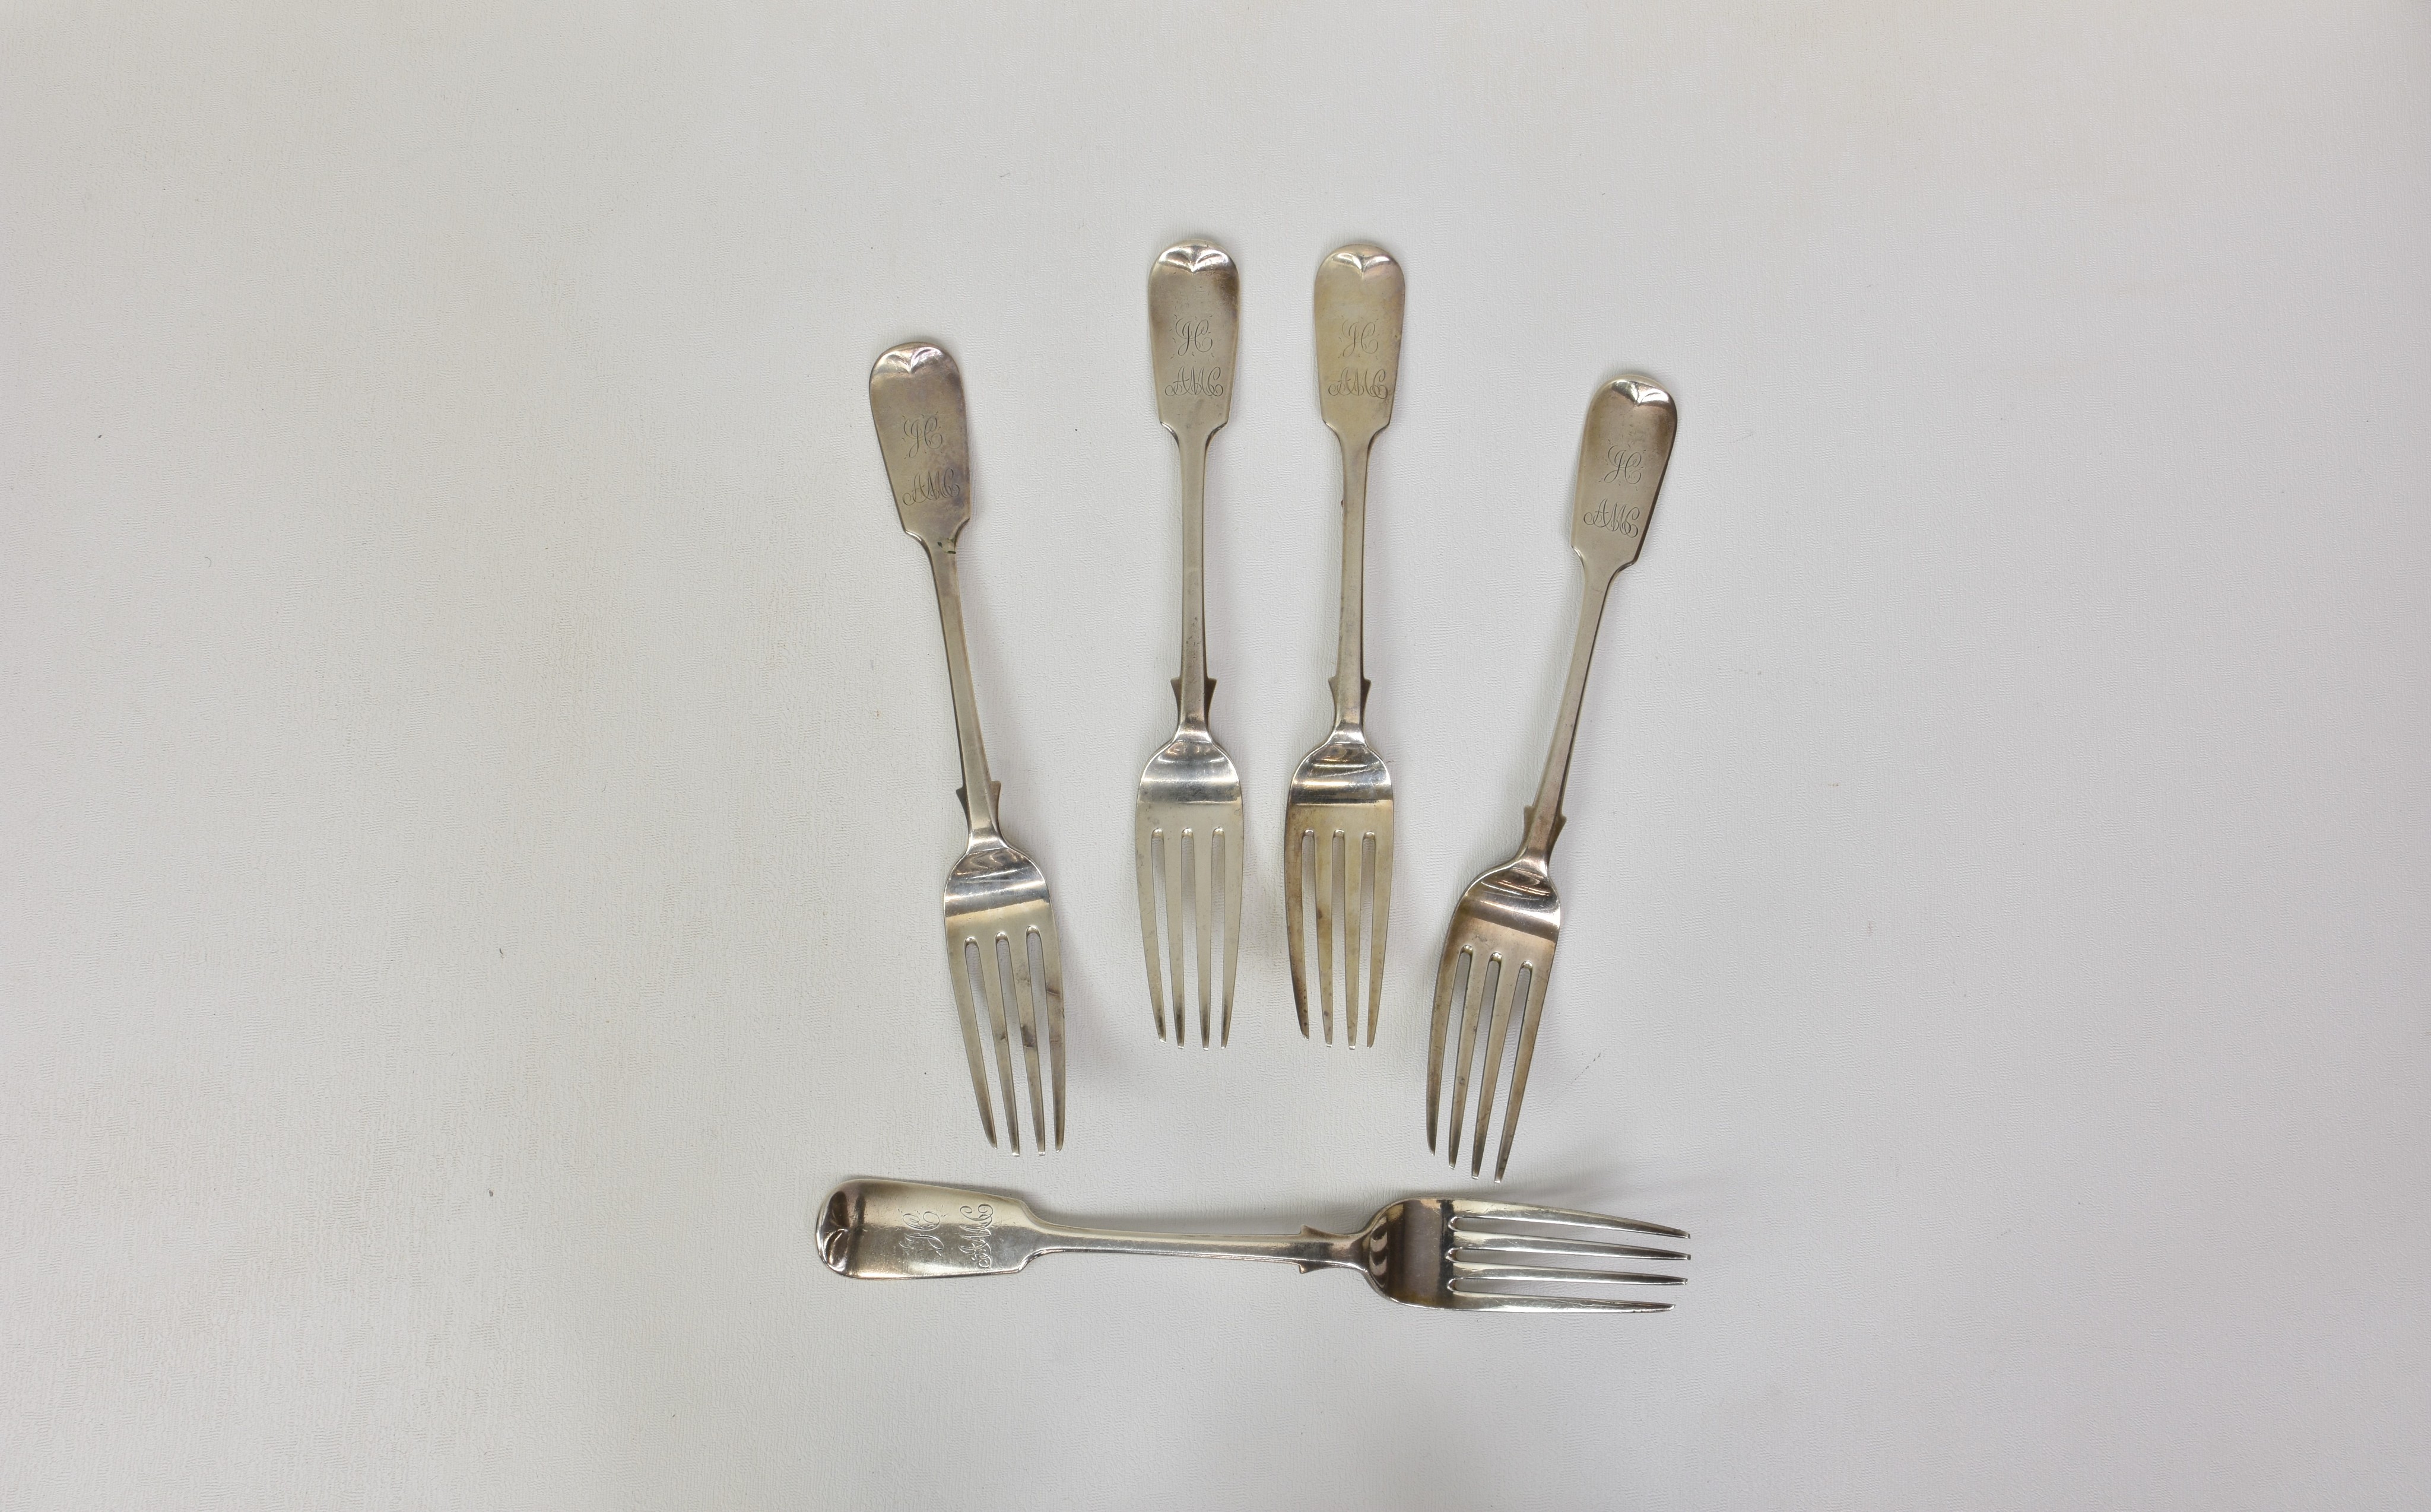 Five Channel Island Victorian fiddle pattern silver table forks, over stamped maker's mark 'J.P.